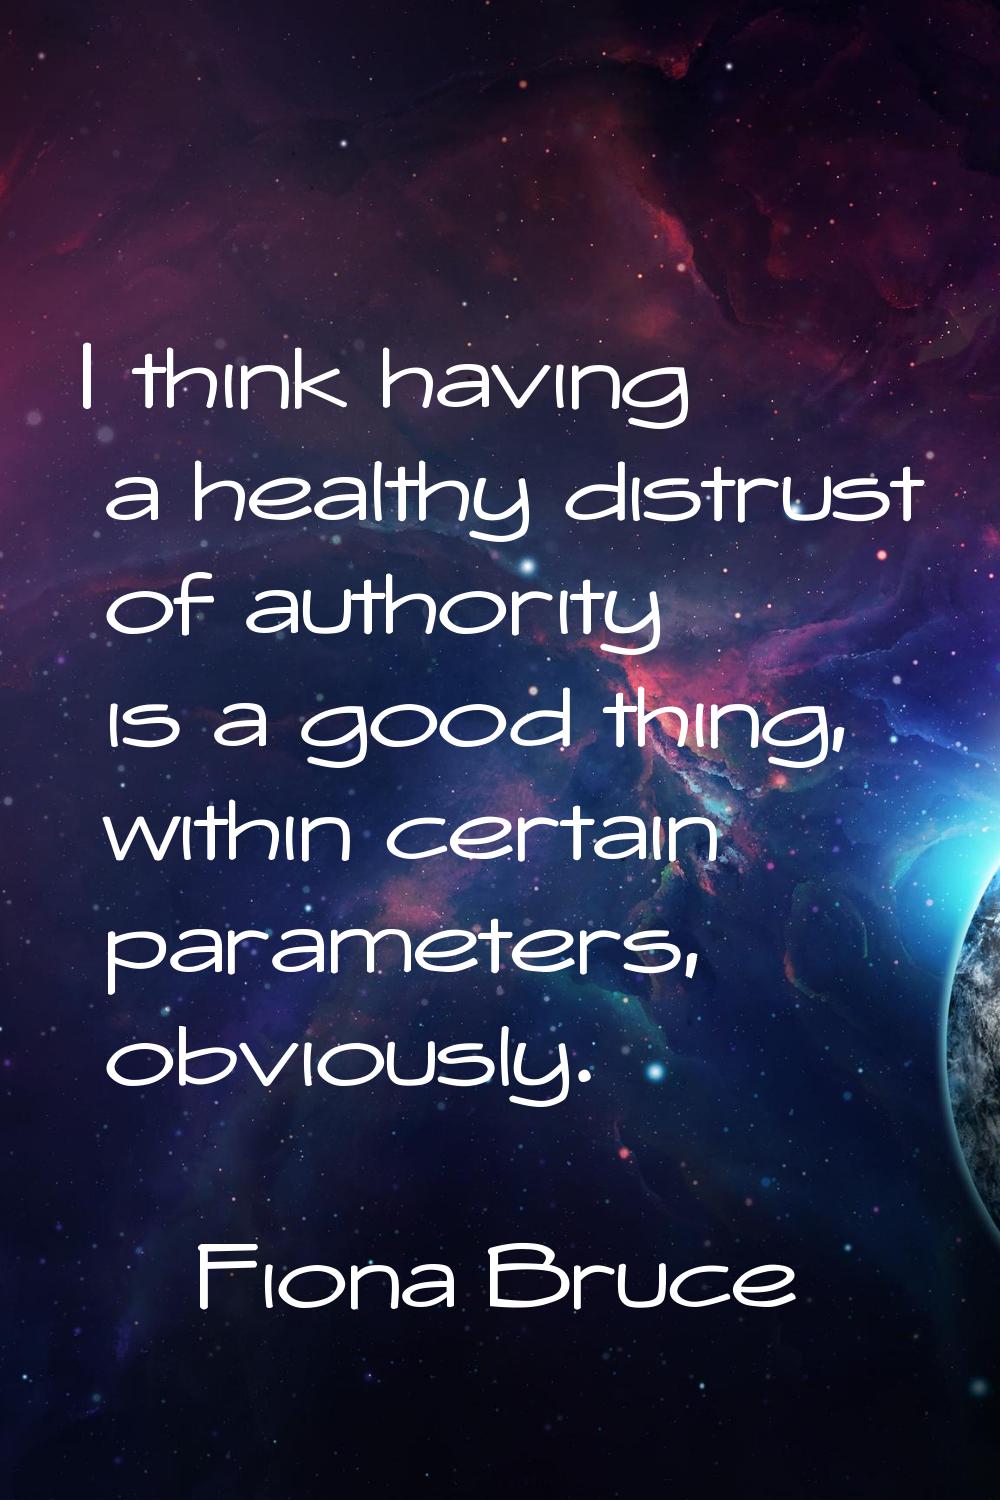 I think having a healthy distrust of authority is a good thing, within certain parameters, obviousl